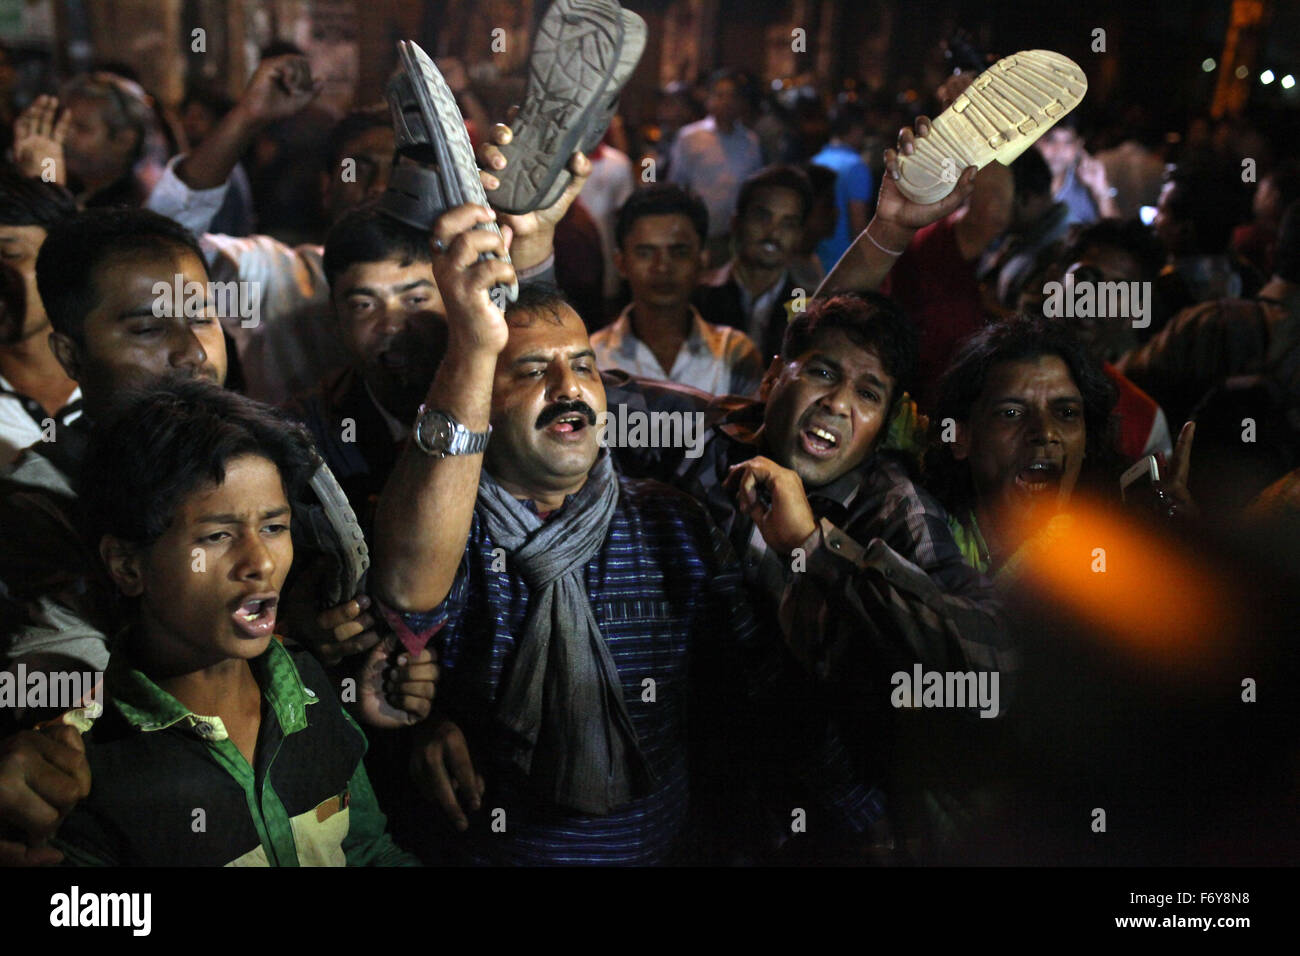 Dhaka, Bangladesh. 22nd November: People's react showing shoe after hearing of war criminals Salauddin Quader Chowdhury and Ali Ahsan Muhammad Mojaheed's executed in front of Dhaka Central Jail Gate in Dhaka on November 22, 2015. Two war criminals, BNP leader Salauddin Quader Chowdhury and Jamaat-e-Islami secretary general Ali Ahsan Mohammad Mojaheed, have been executed at the same time for their crimes committed against humanity in 1971, says jail official. They were executed by hanging at 12:55am Sunday at Dhaka Central Jail, said Inspector General of Prison Syed Iftekhar Uddin. Both of them Stock Photo